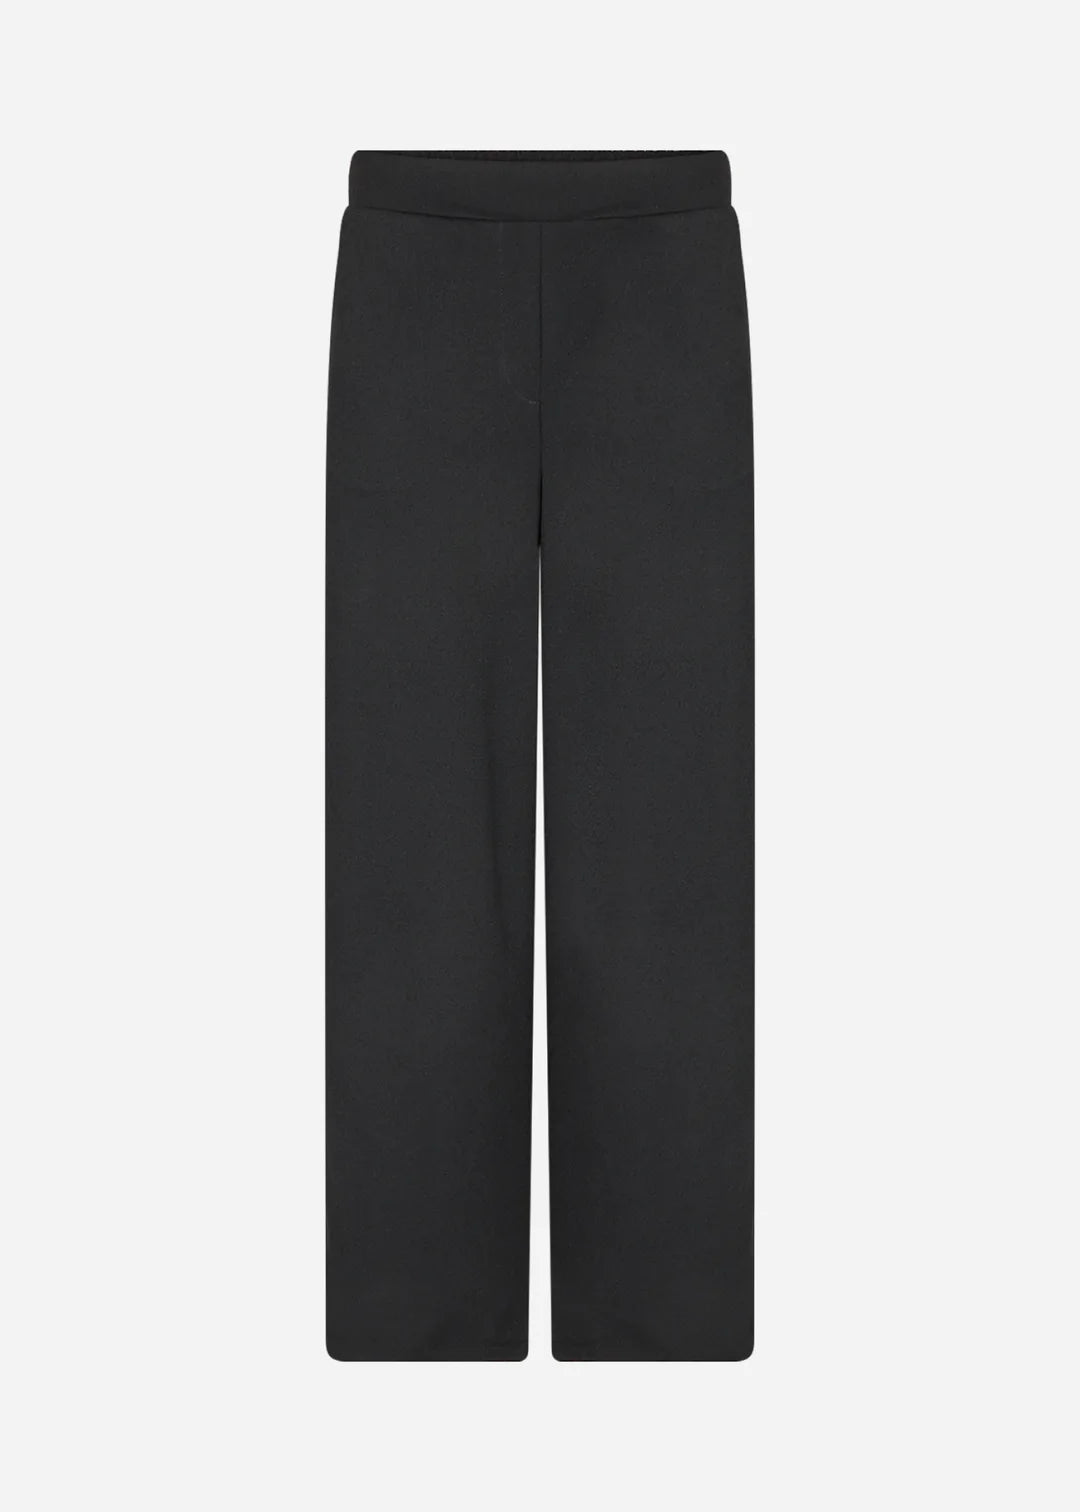 Soyaconcept trousers with wide legs and pockets